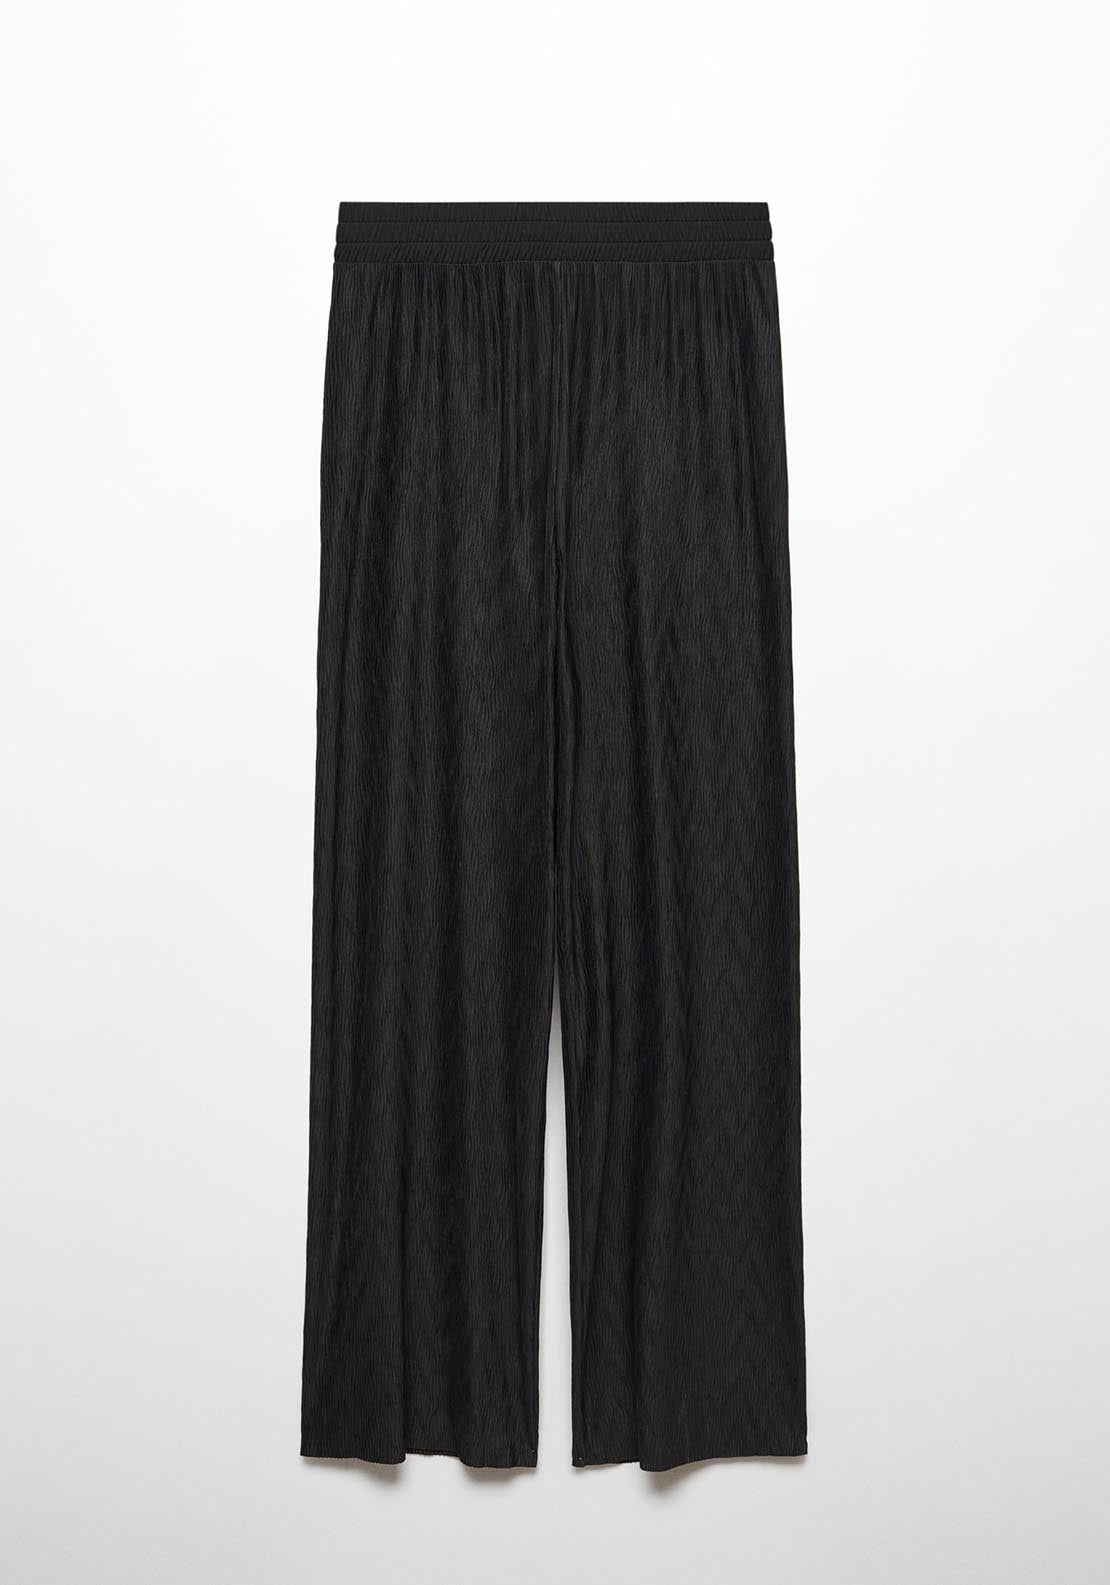 Mango Textured wide leg trousers 4 Shaws Department Stores